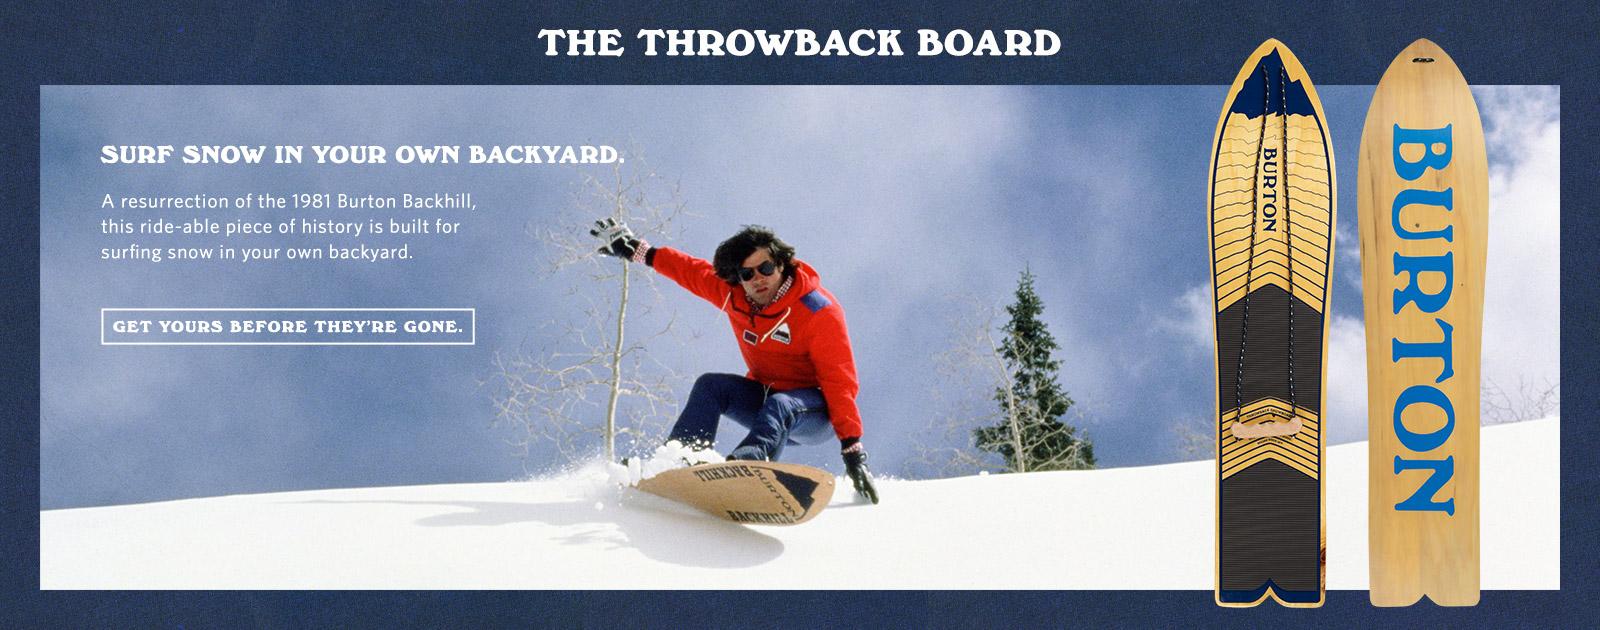 als Acrobatiek leg uit Burton Snowboards on Twitter: "Surf snow in your own backyard with the  Throwback Board. Now available in store and online: http://t.co/yFKZnCoZ30  http://t.co/EqW4YYroHh" / Twitter